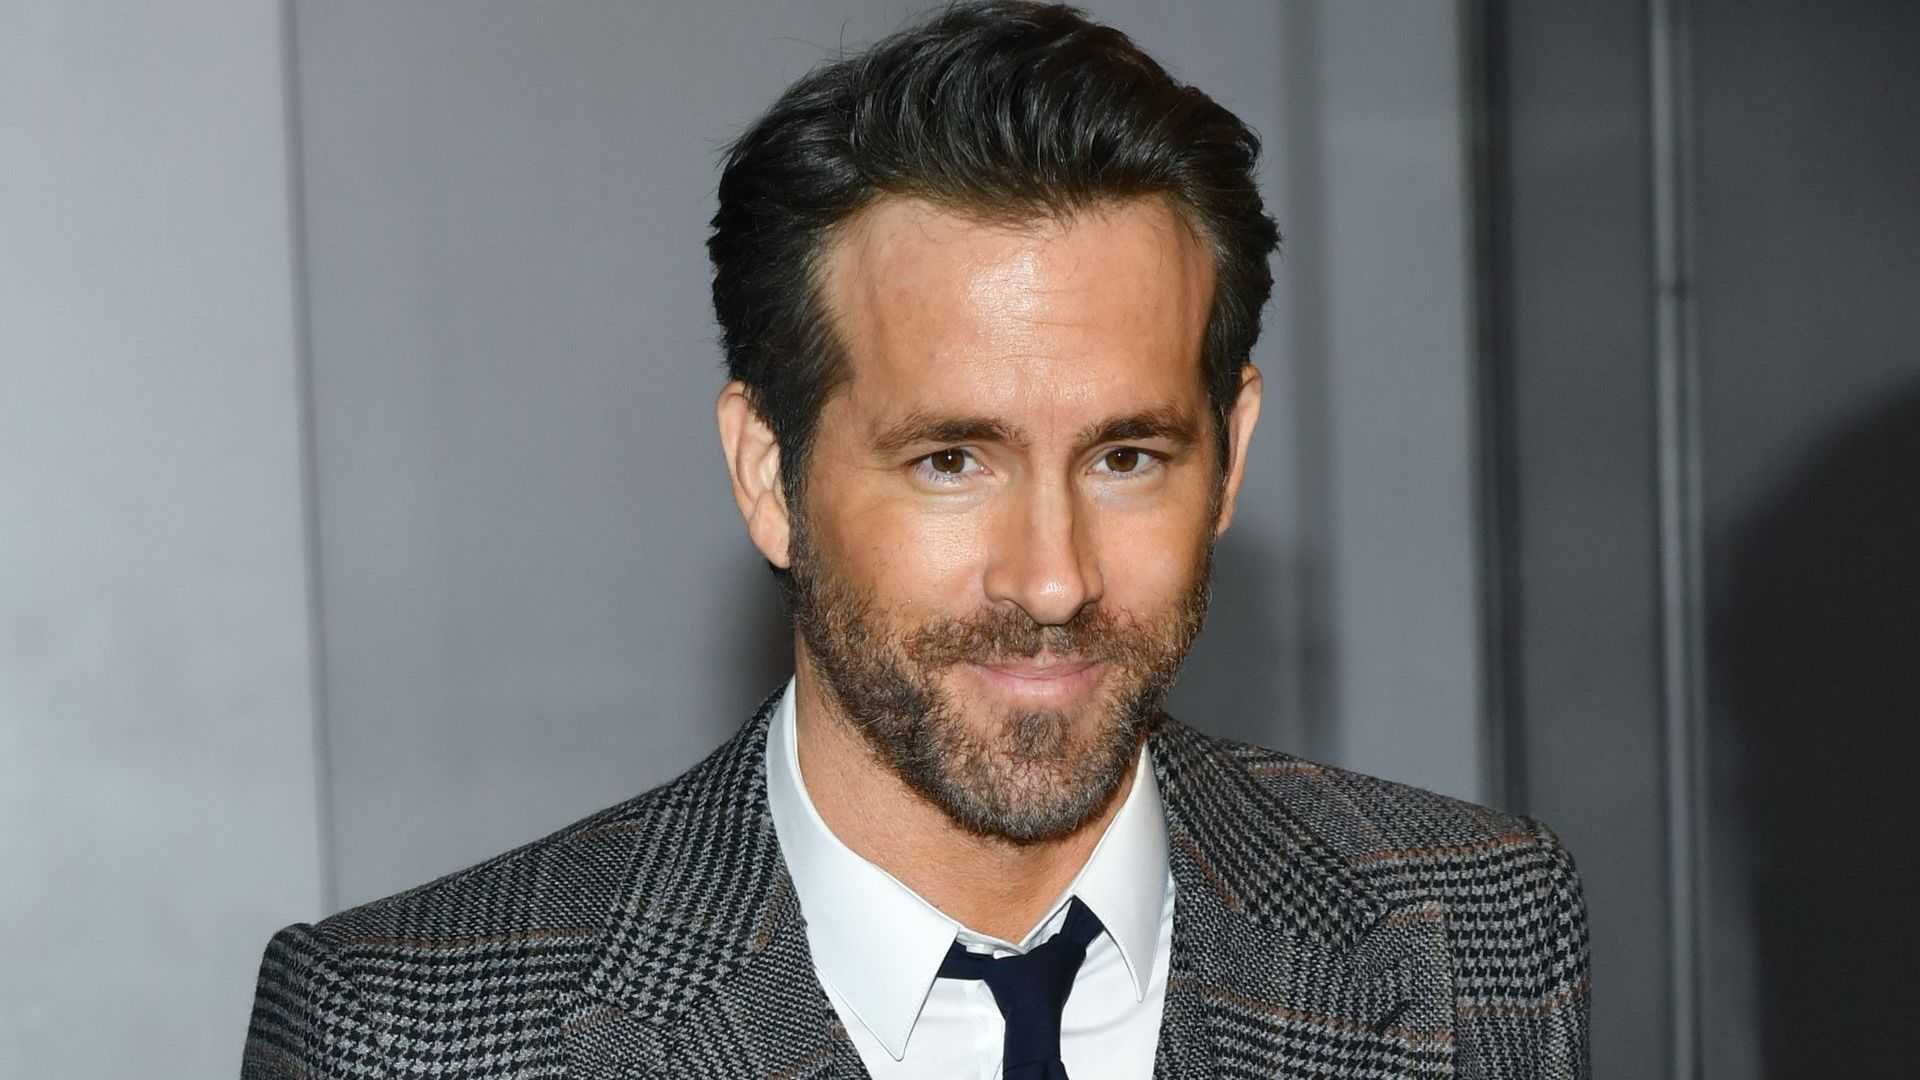 Ryan Reynolds Shares First Look At The Christmas Movie He's Making